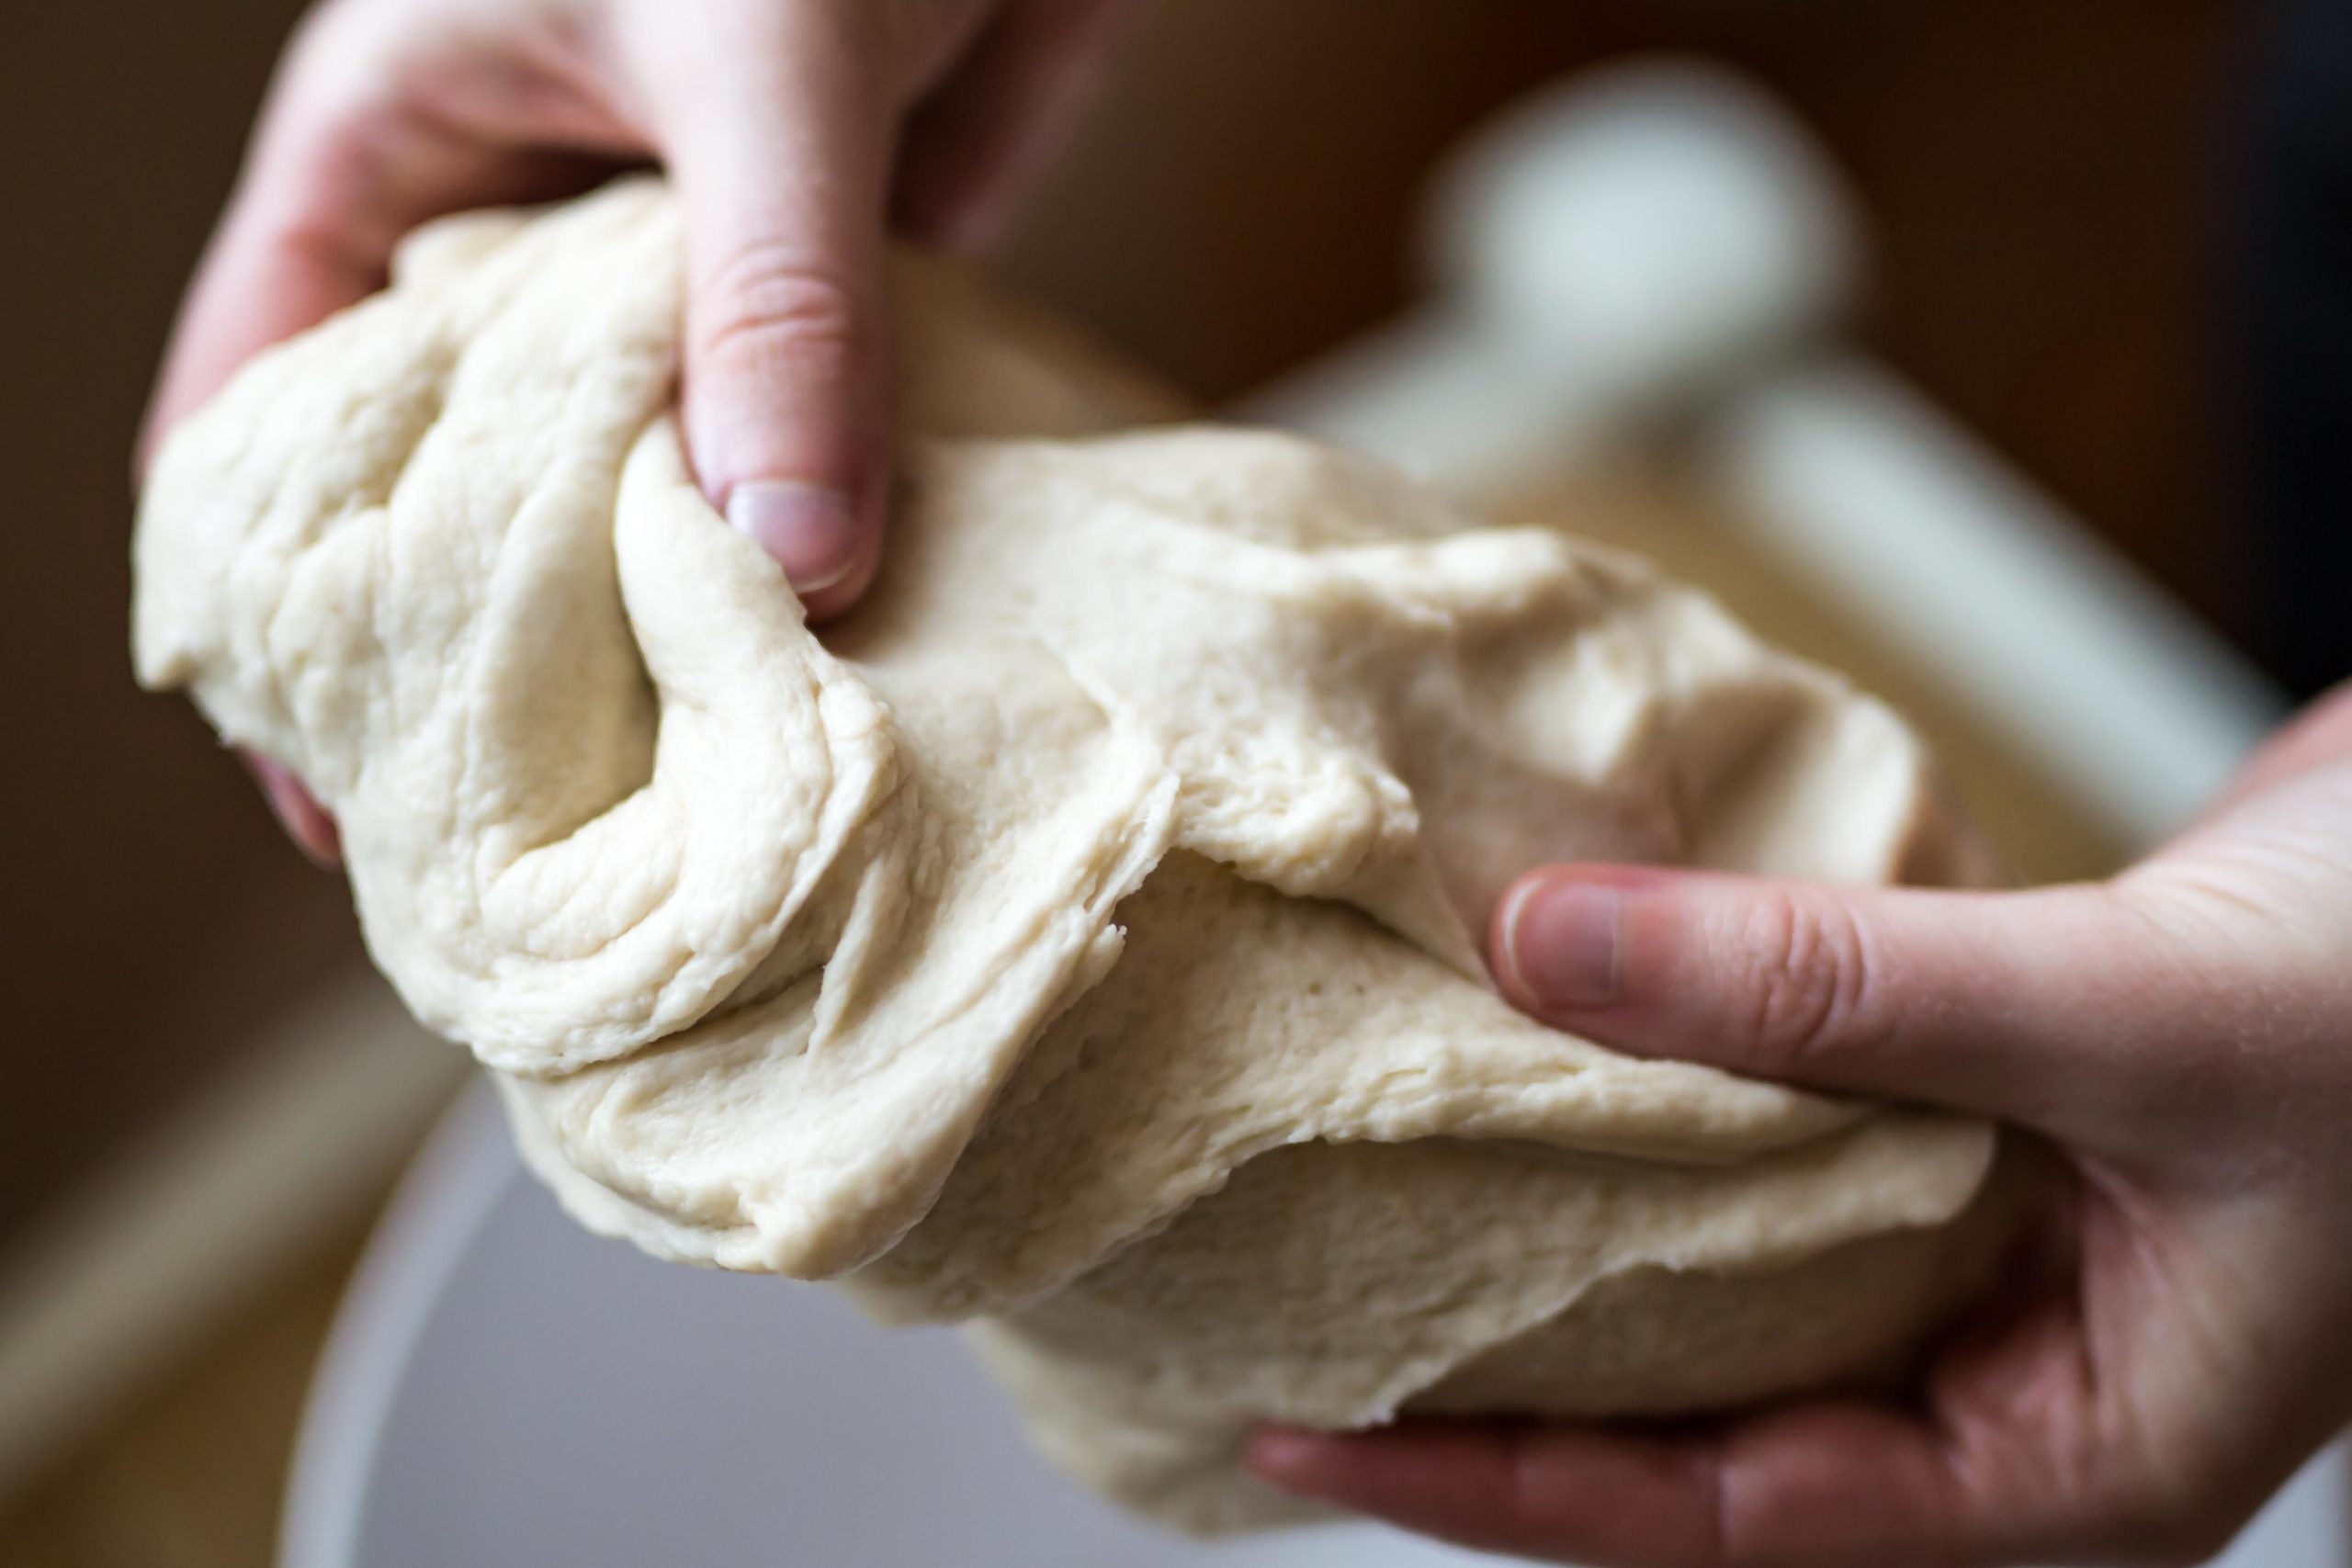 A fun idea for kids at home. Child his kneading banana playdough in her fingers, over a bowl.